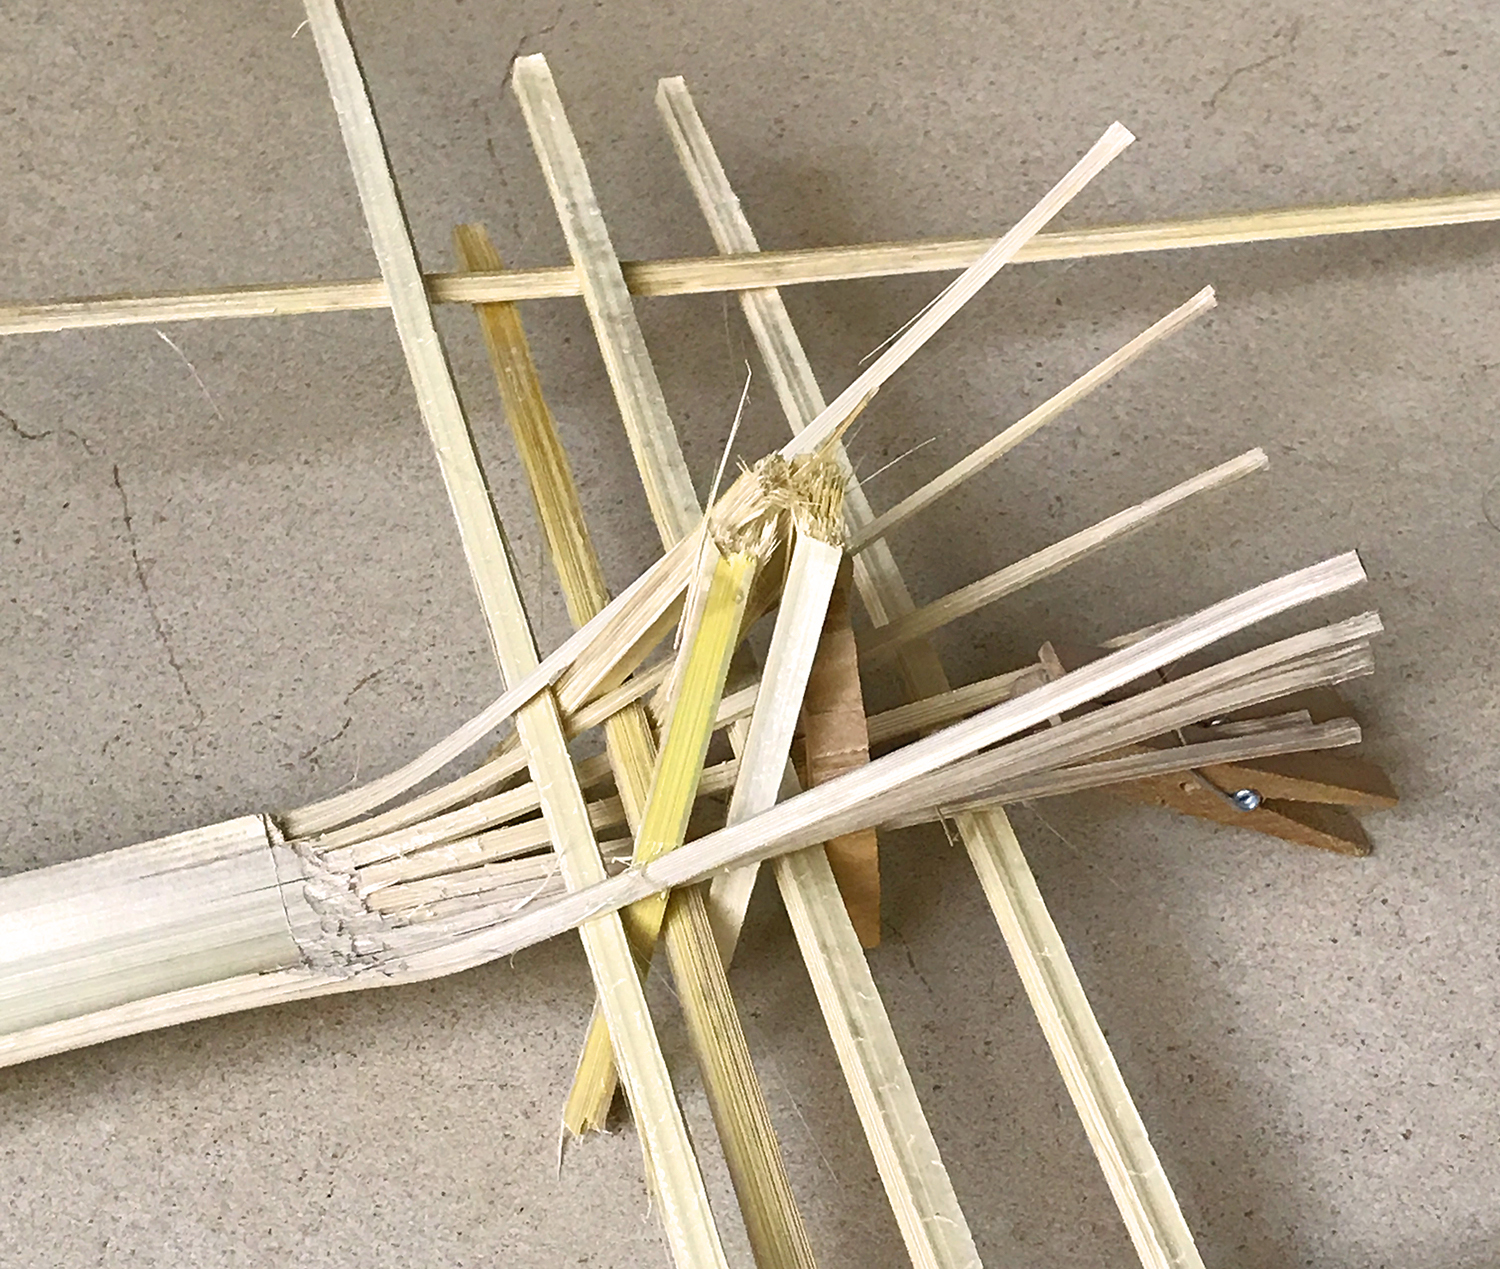 Bamboo forming experiment in the hotel room